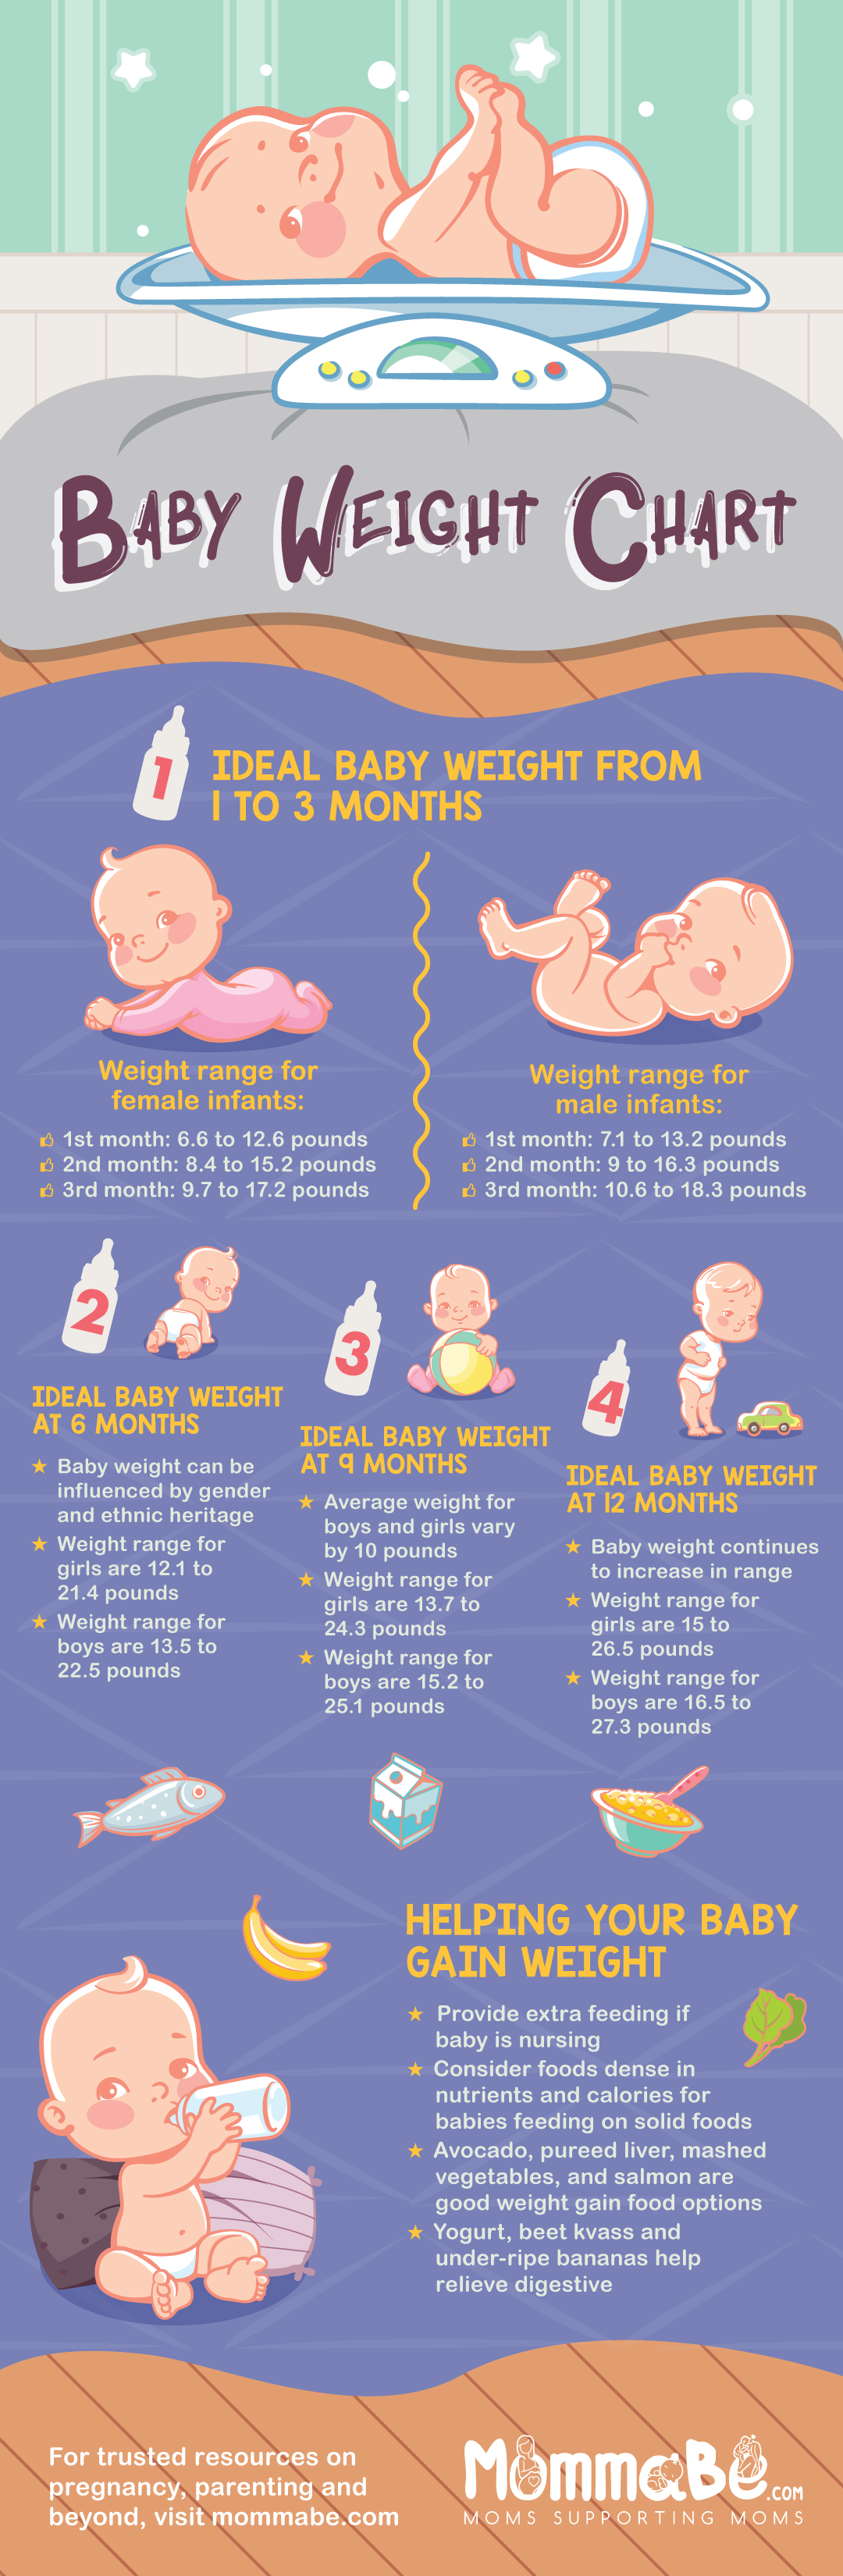 Infographic | Baby Weight Chart